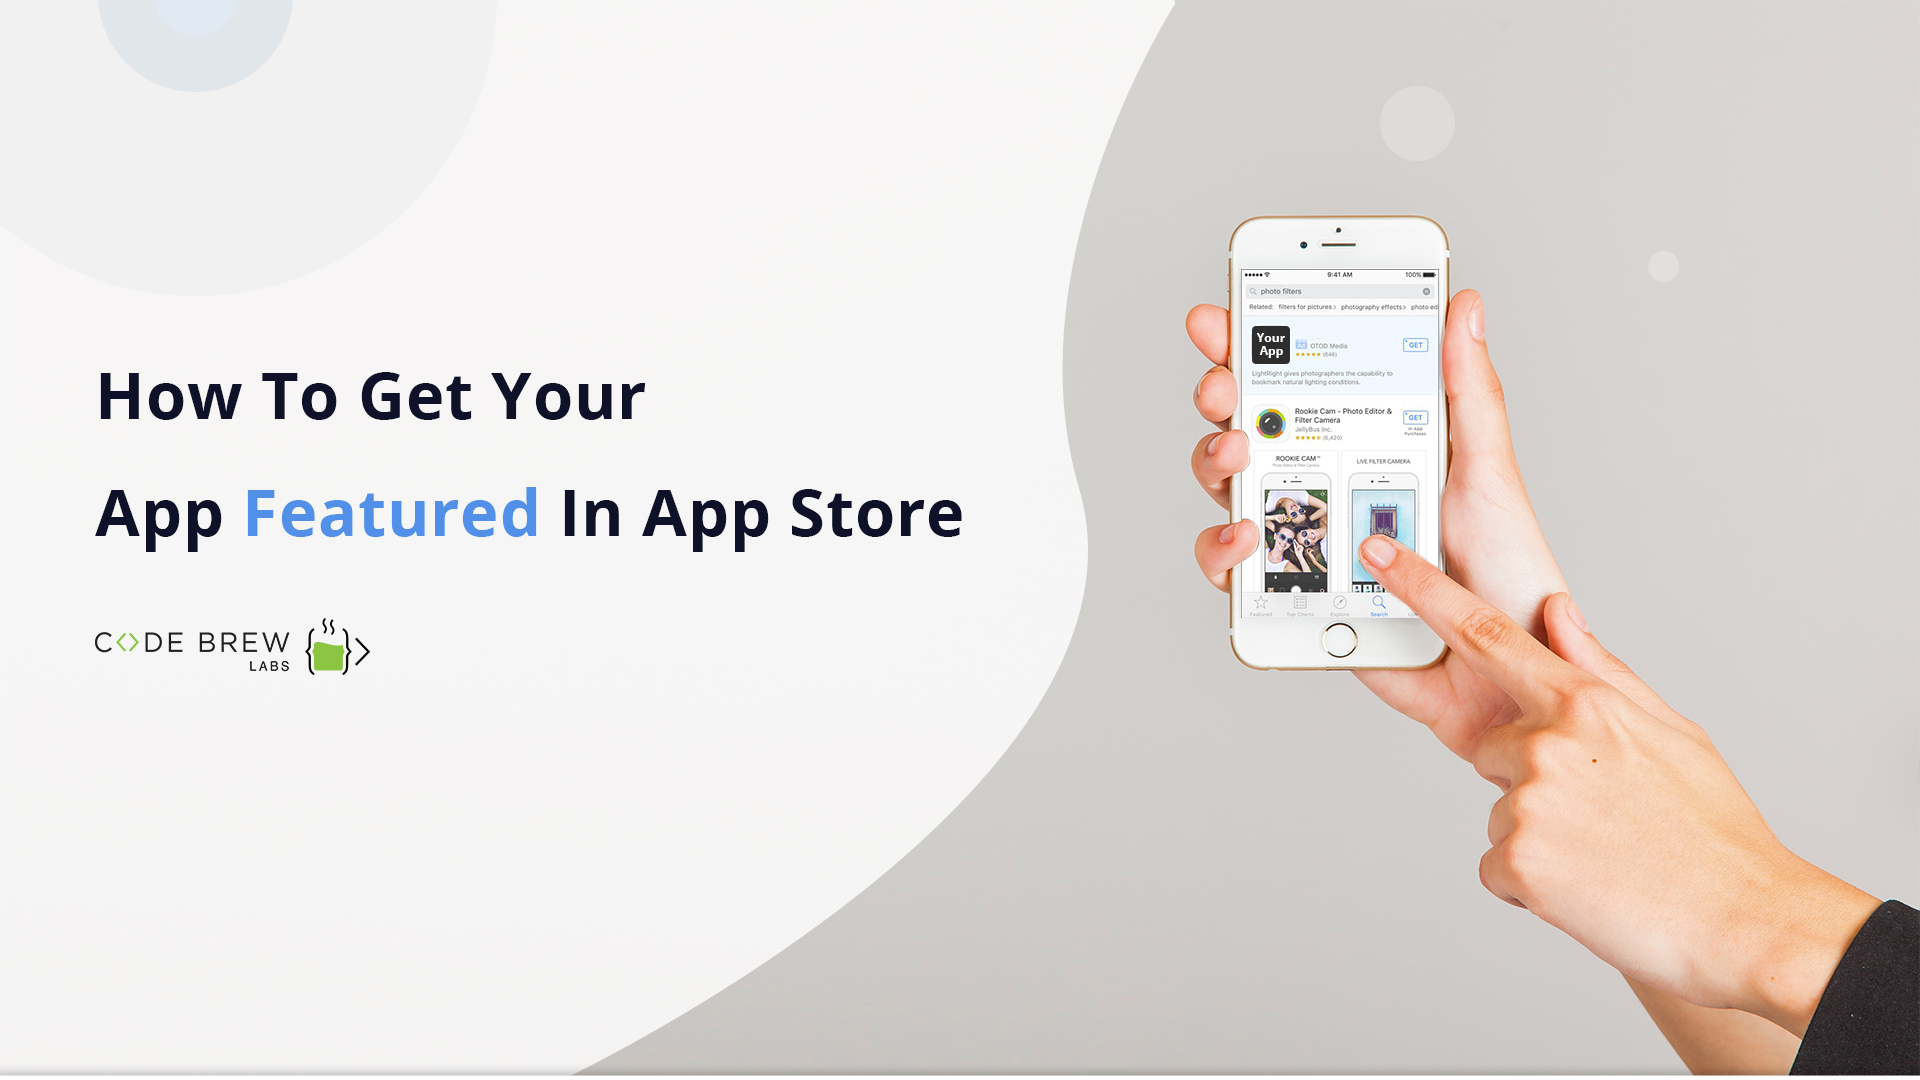 How to get your App featured in App Store?